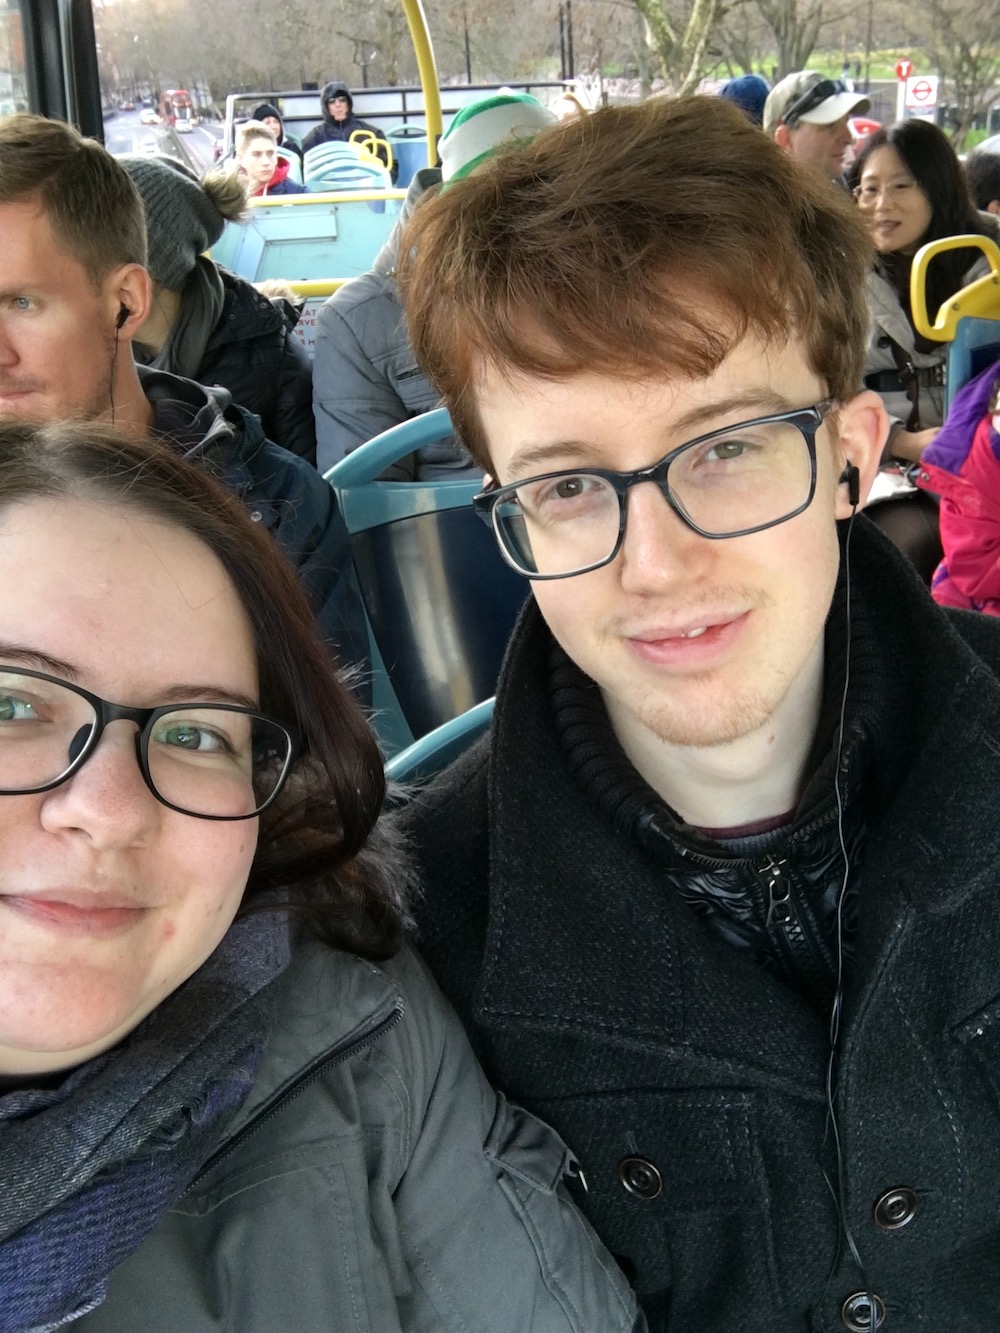 matthew-and-leah-on-tourist-bus-london